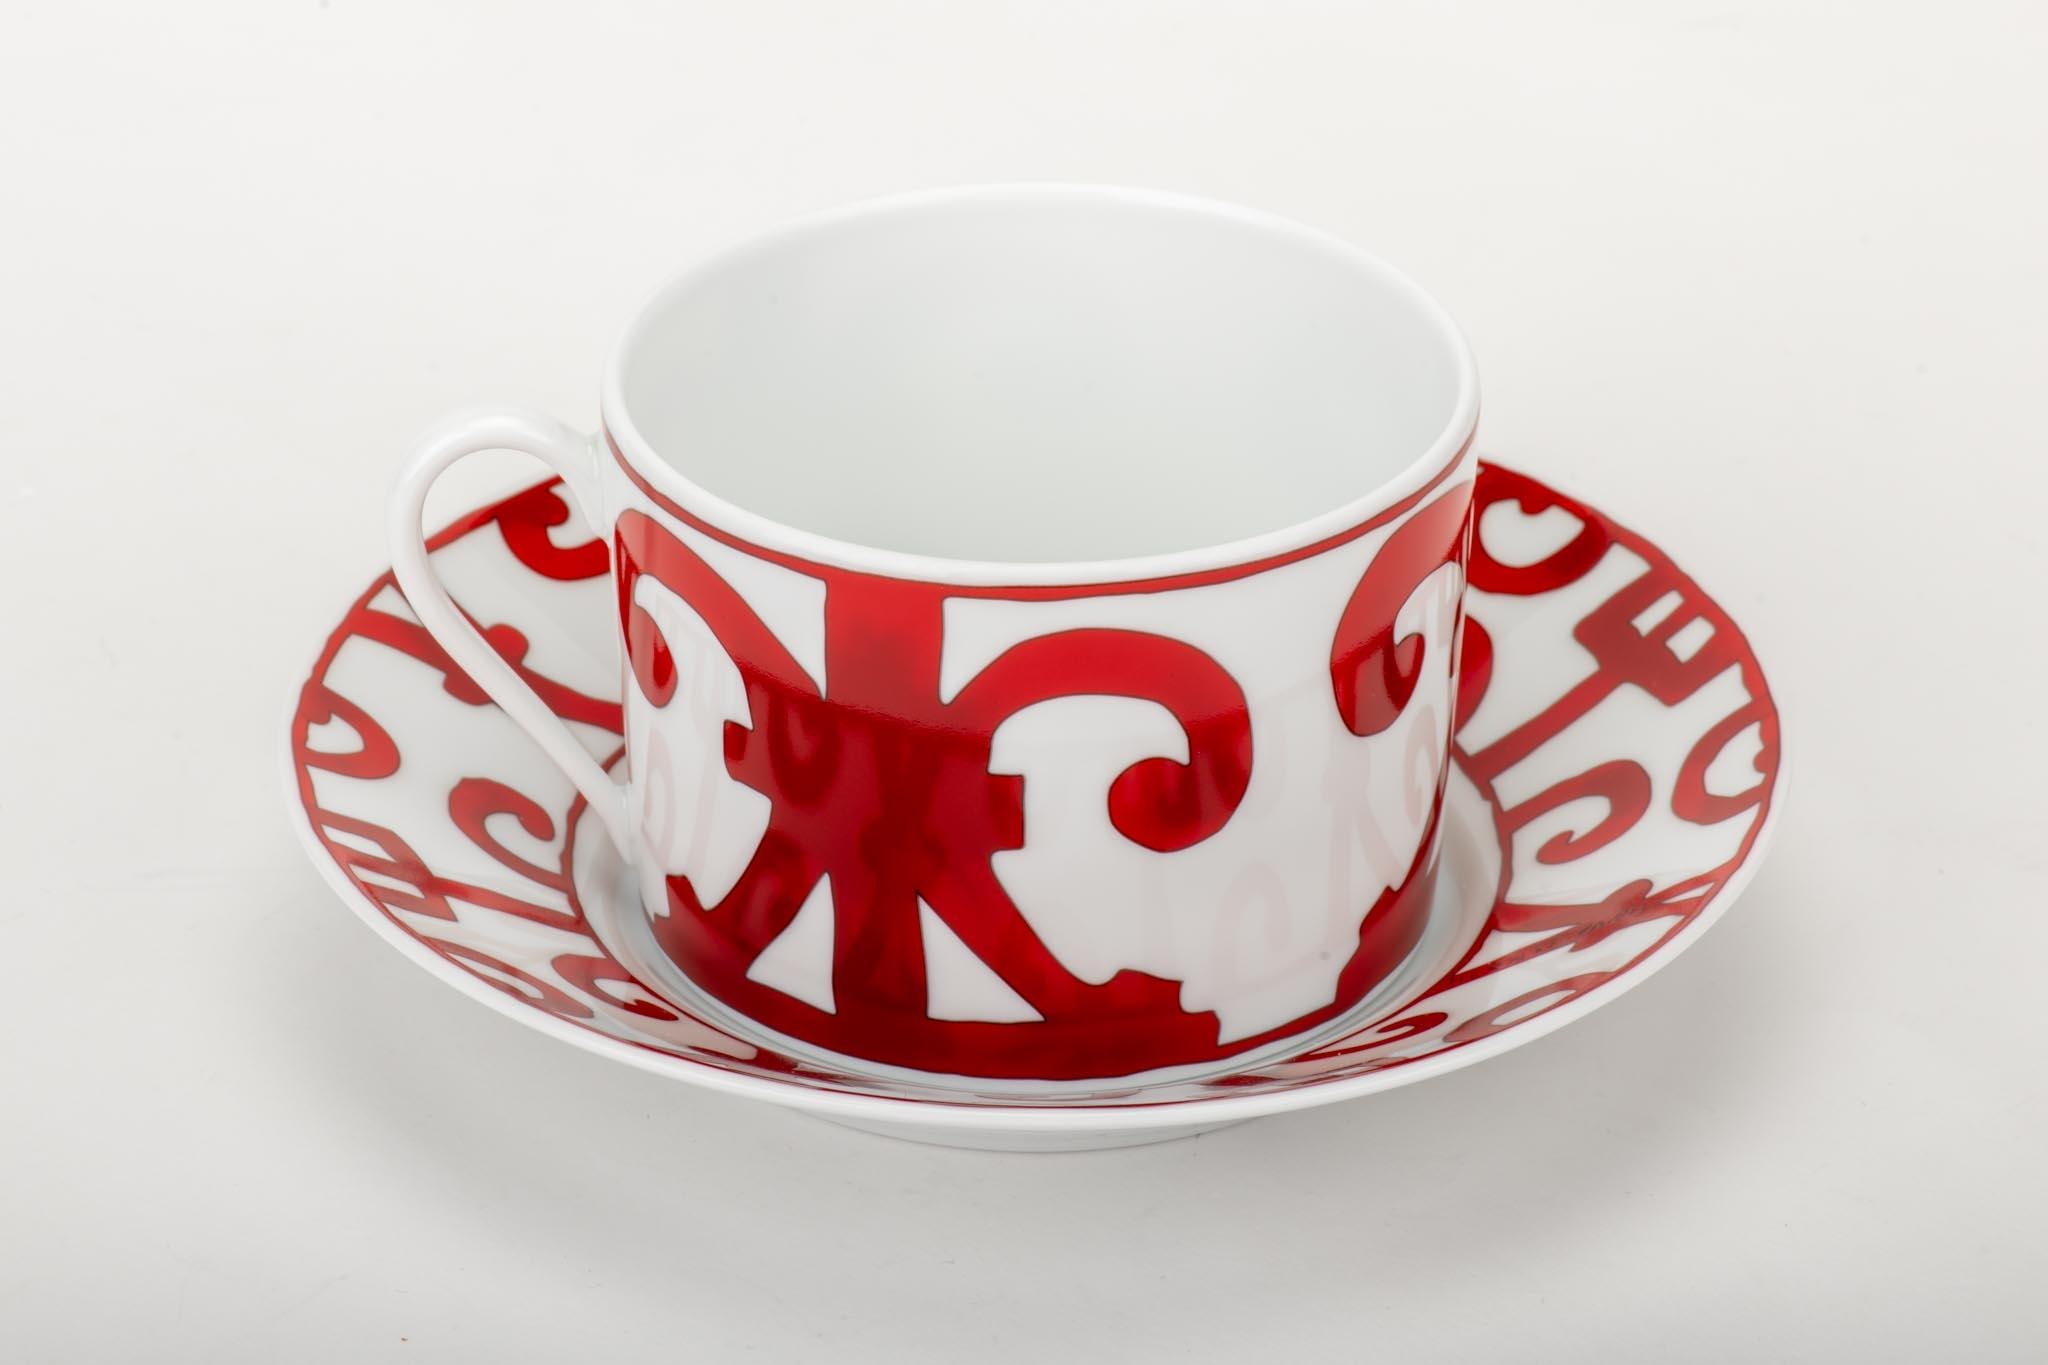 Hermès teacup and saucer with an ornate design in red and white. Brand new with box.